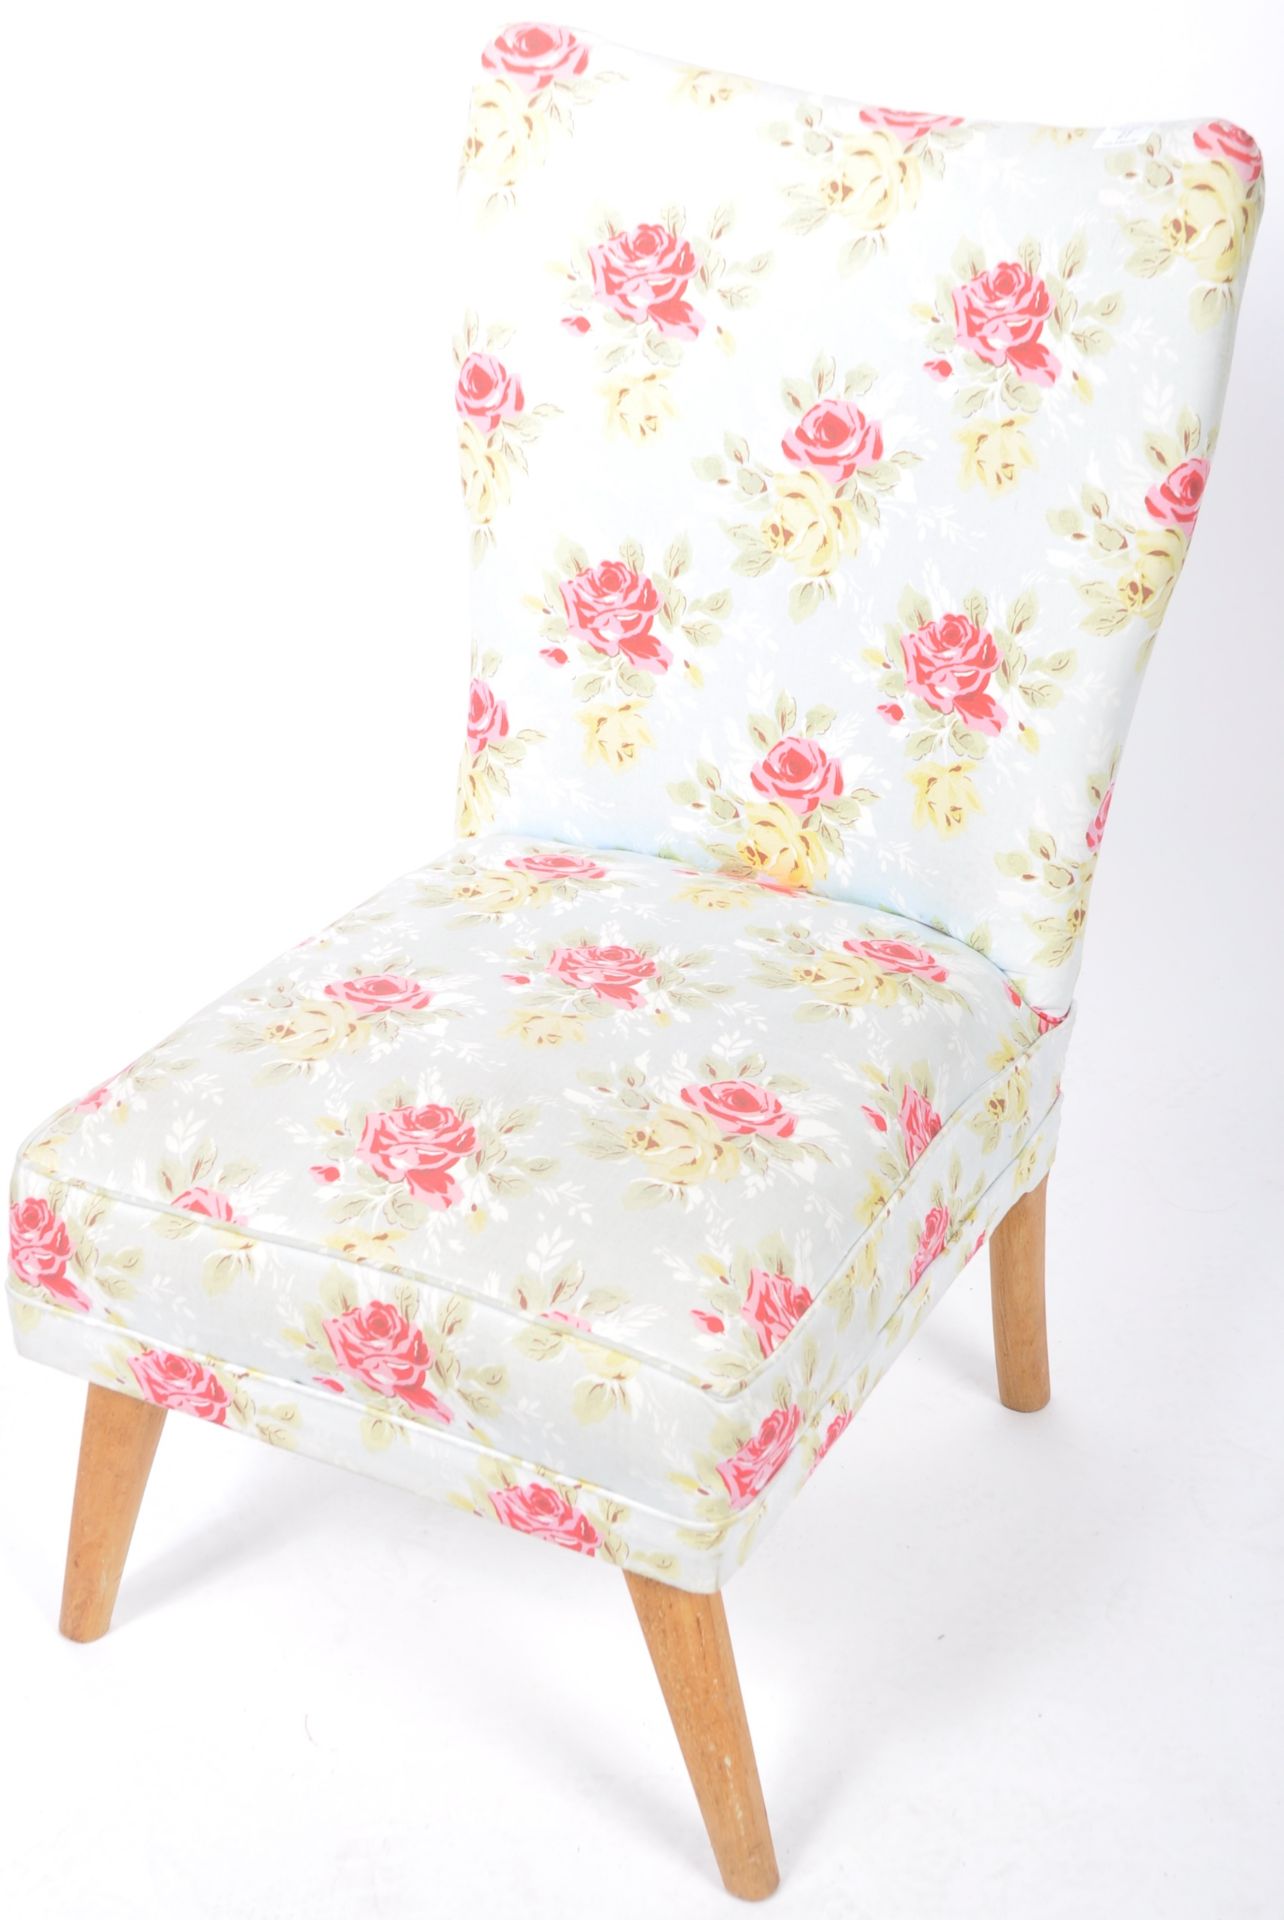 RETRO HOWARD KEITH MANNER LOW COCKTAIL CHAIR IN CATH KIDSTON UPHOLSTERY - Image 5 of 7